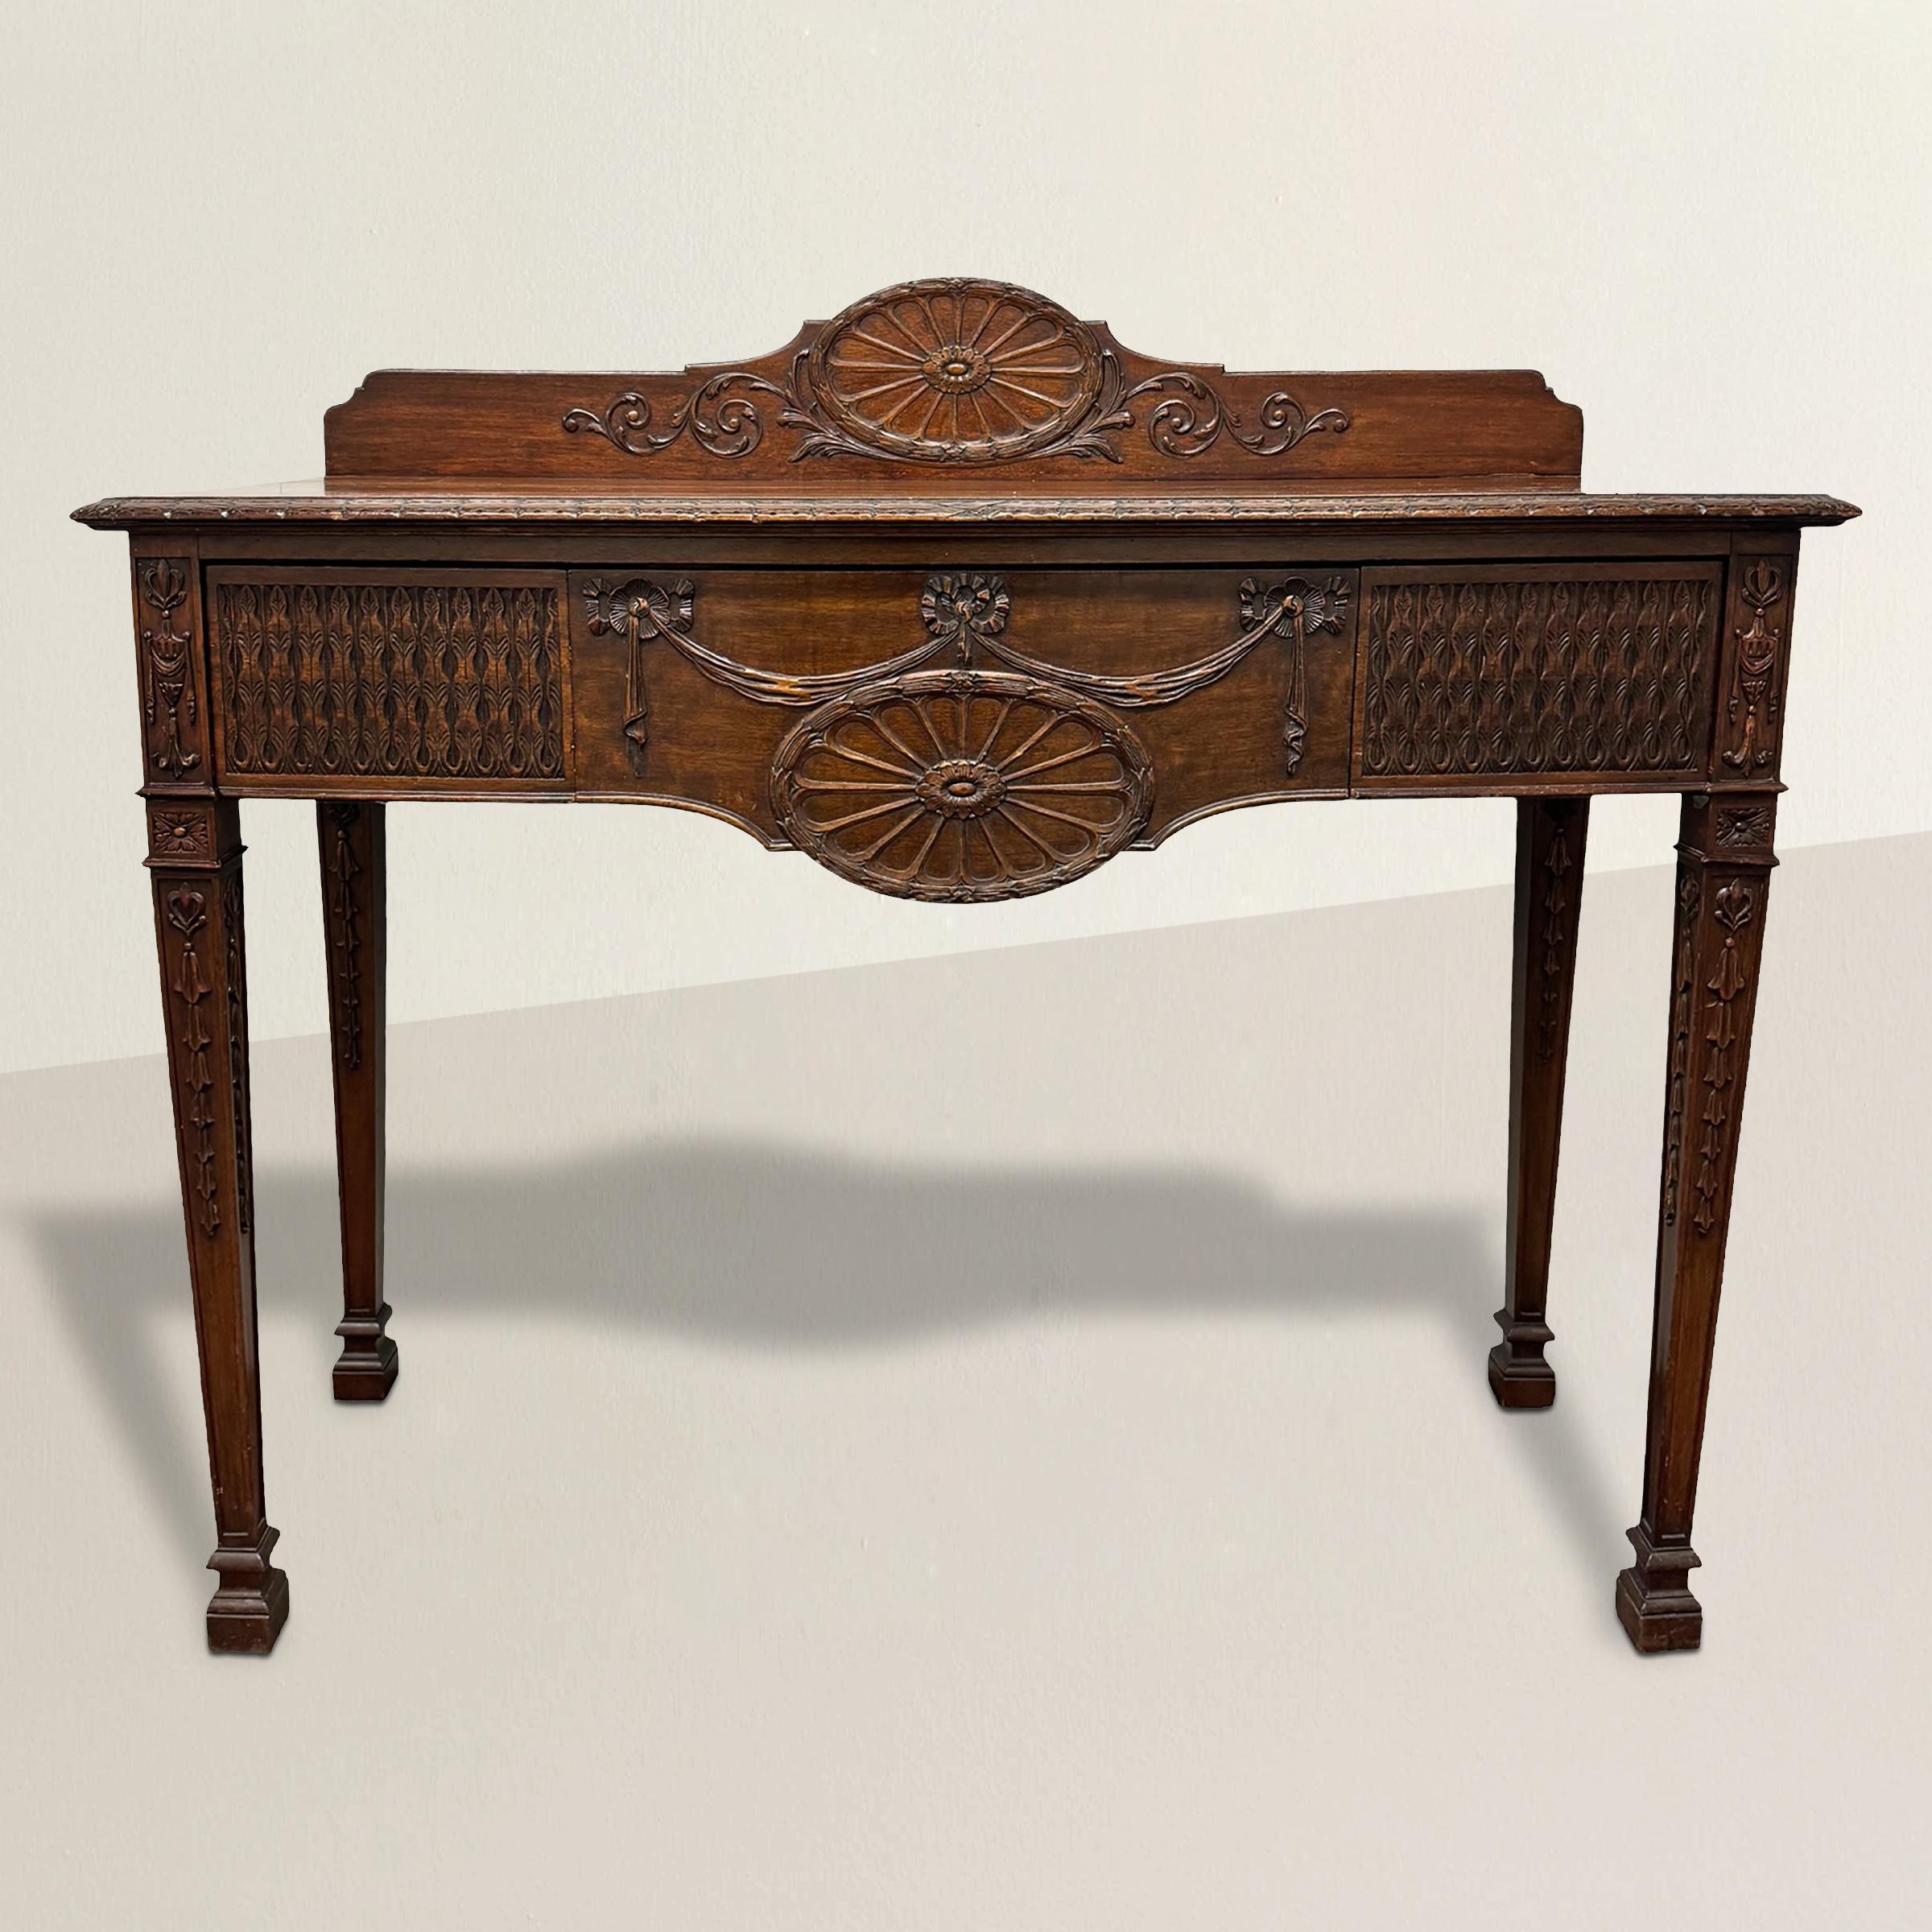 Crafted in the refined tradition of the Adam style, this 19th-century English mahogany console exudes timeless elegance and classical sophistication. The back crest rail is adorned with a grand laurel wreath medallion, a hallmark of Neoclassical